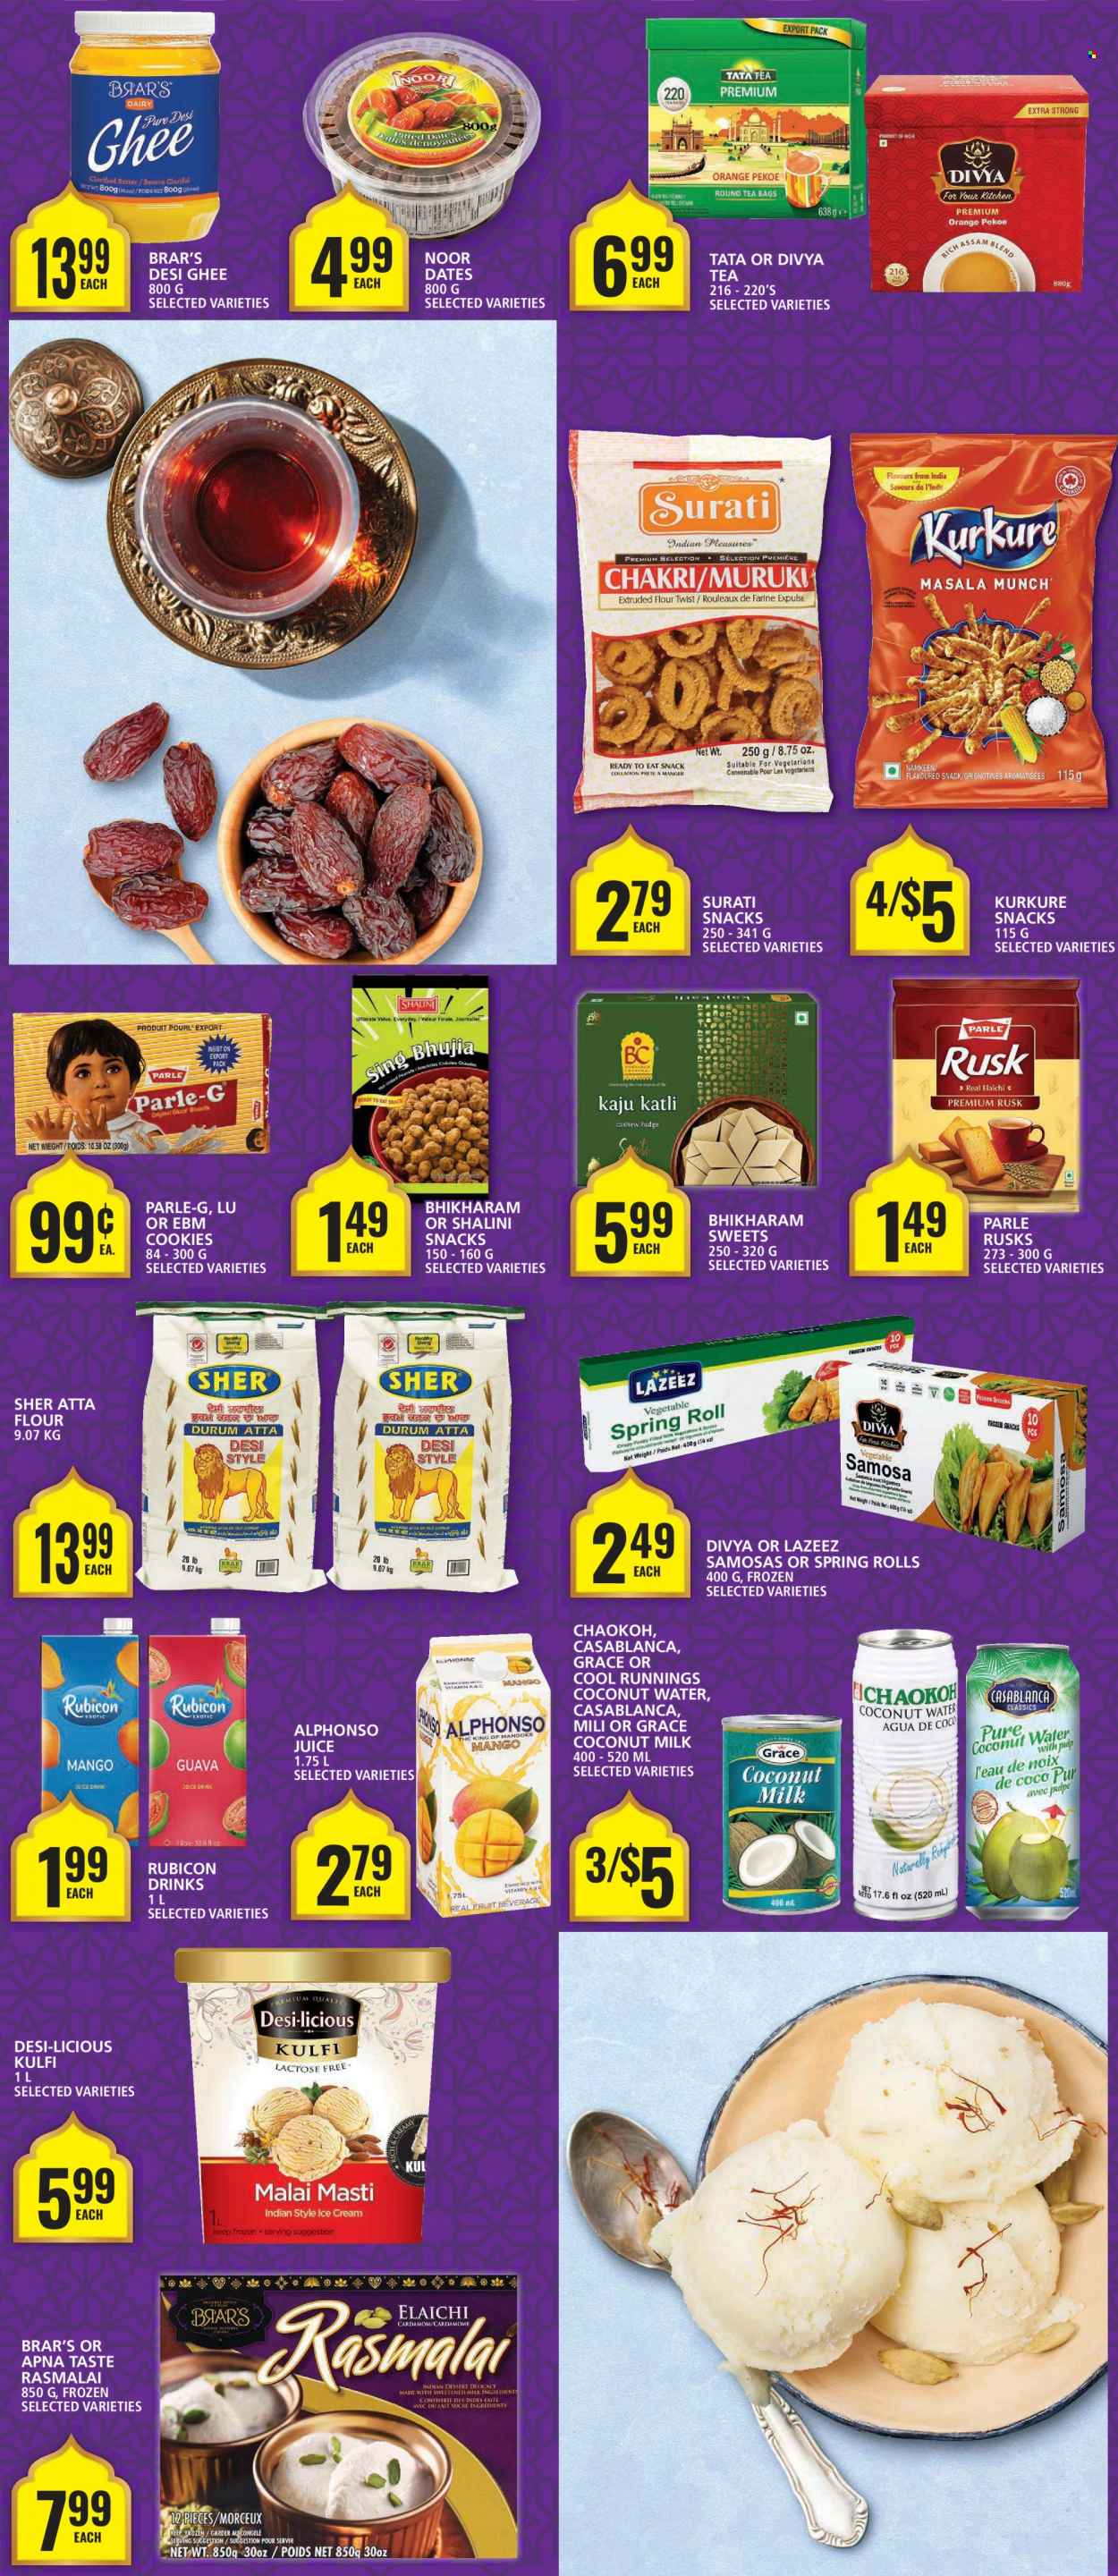 thumbnail - Food Basics Flyer - March 23, 2023 - March 29, 2023 - Sales products - rusks, guava, oranges, spring rolls, ghee, cookies, snack, Parle, flour, coconut milk, bhujia, juice, water, tea bags, PREMIERE. Page 3.